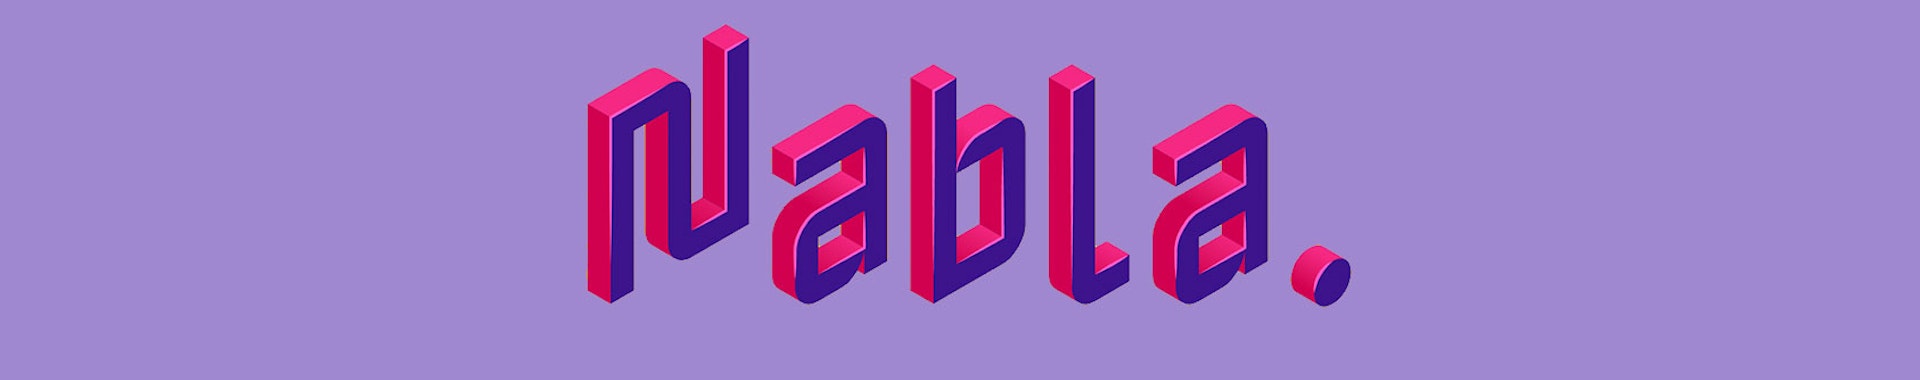 Color variable font Nabla in pinks and purples, rotated slightly with 3d highlights with a mustard background